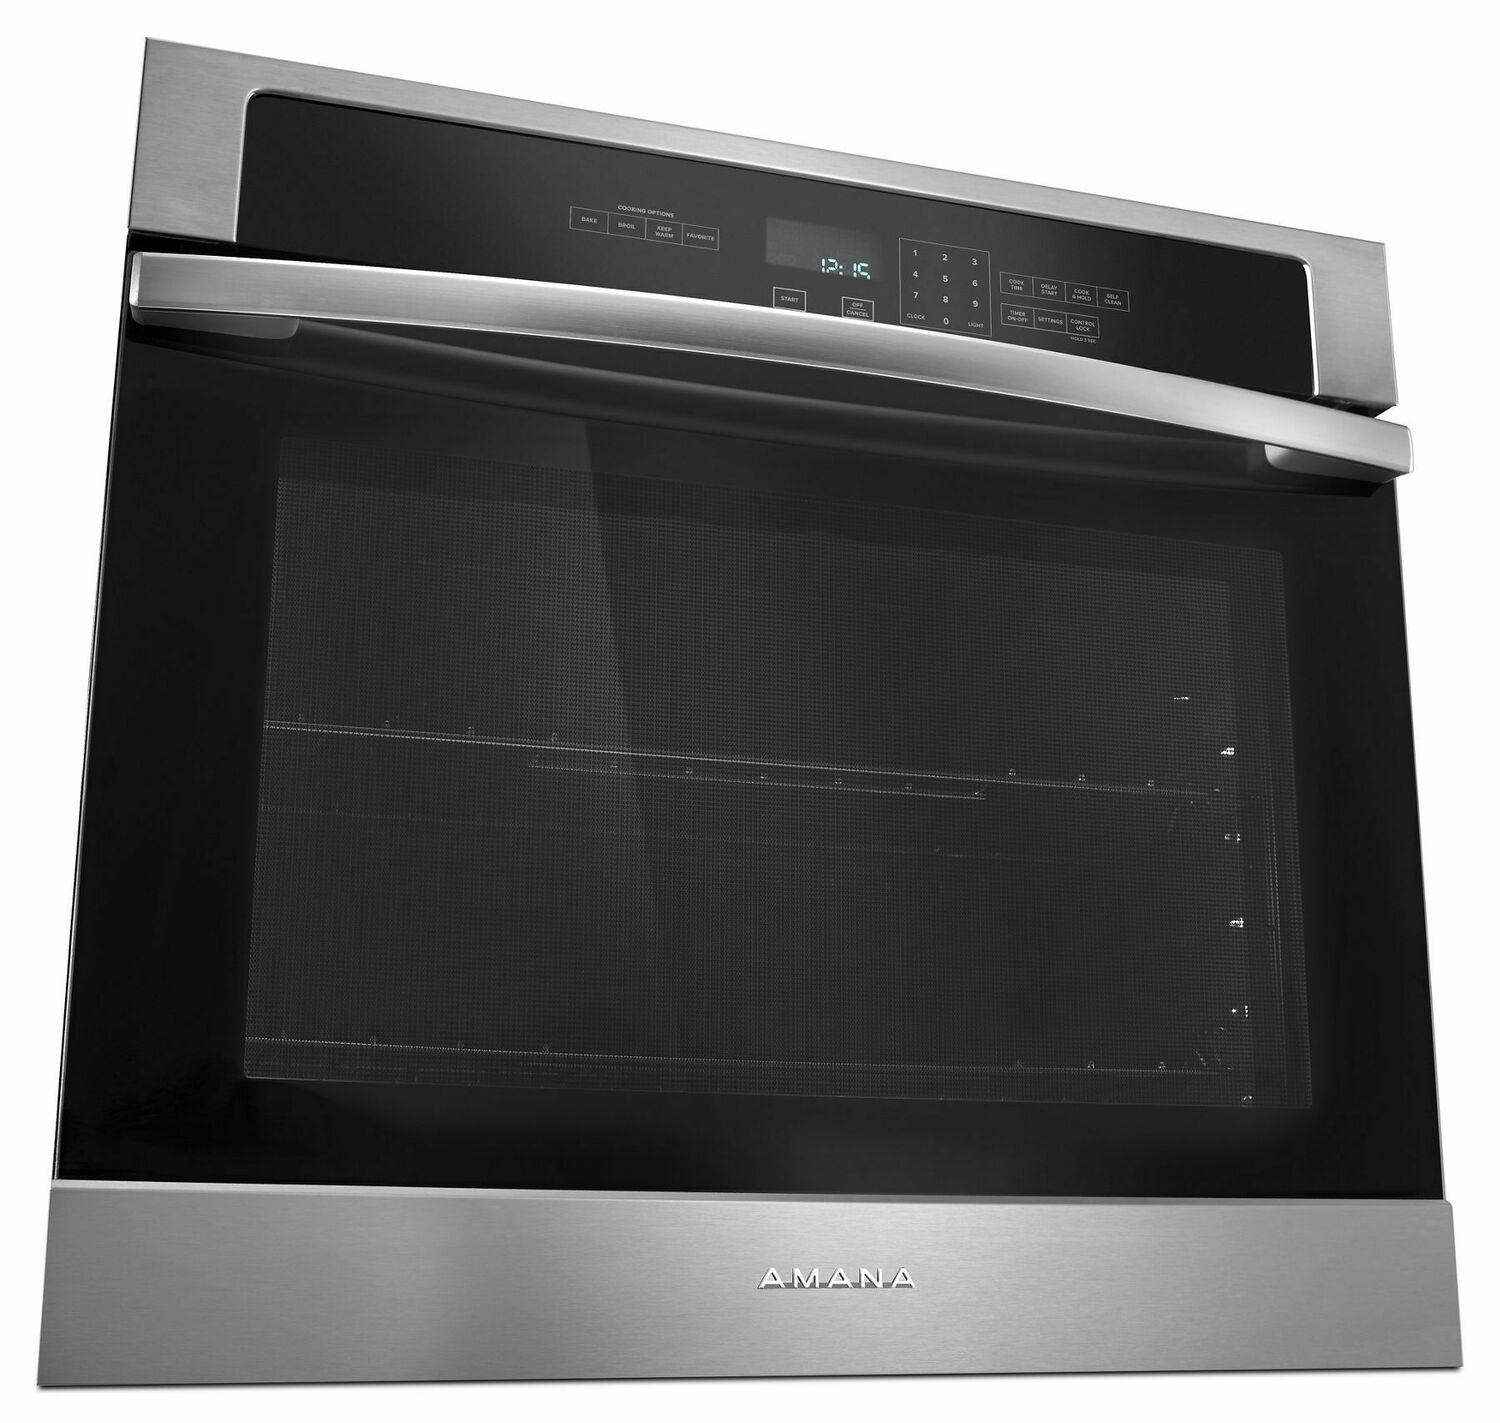 5.0 cu. ft. Thermal Wall Oven - Stainless Steel